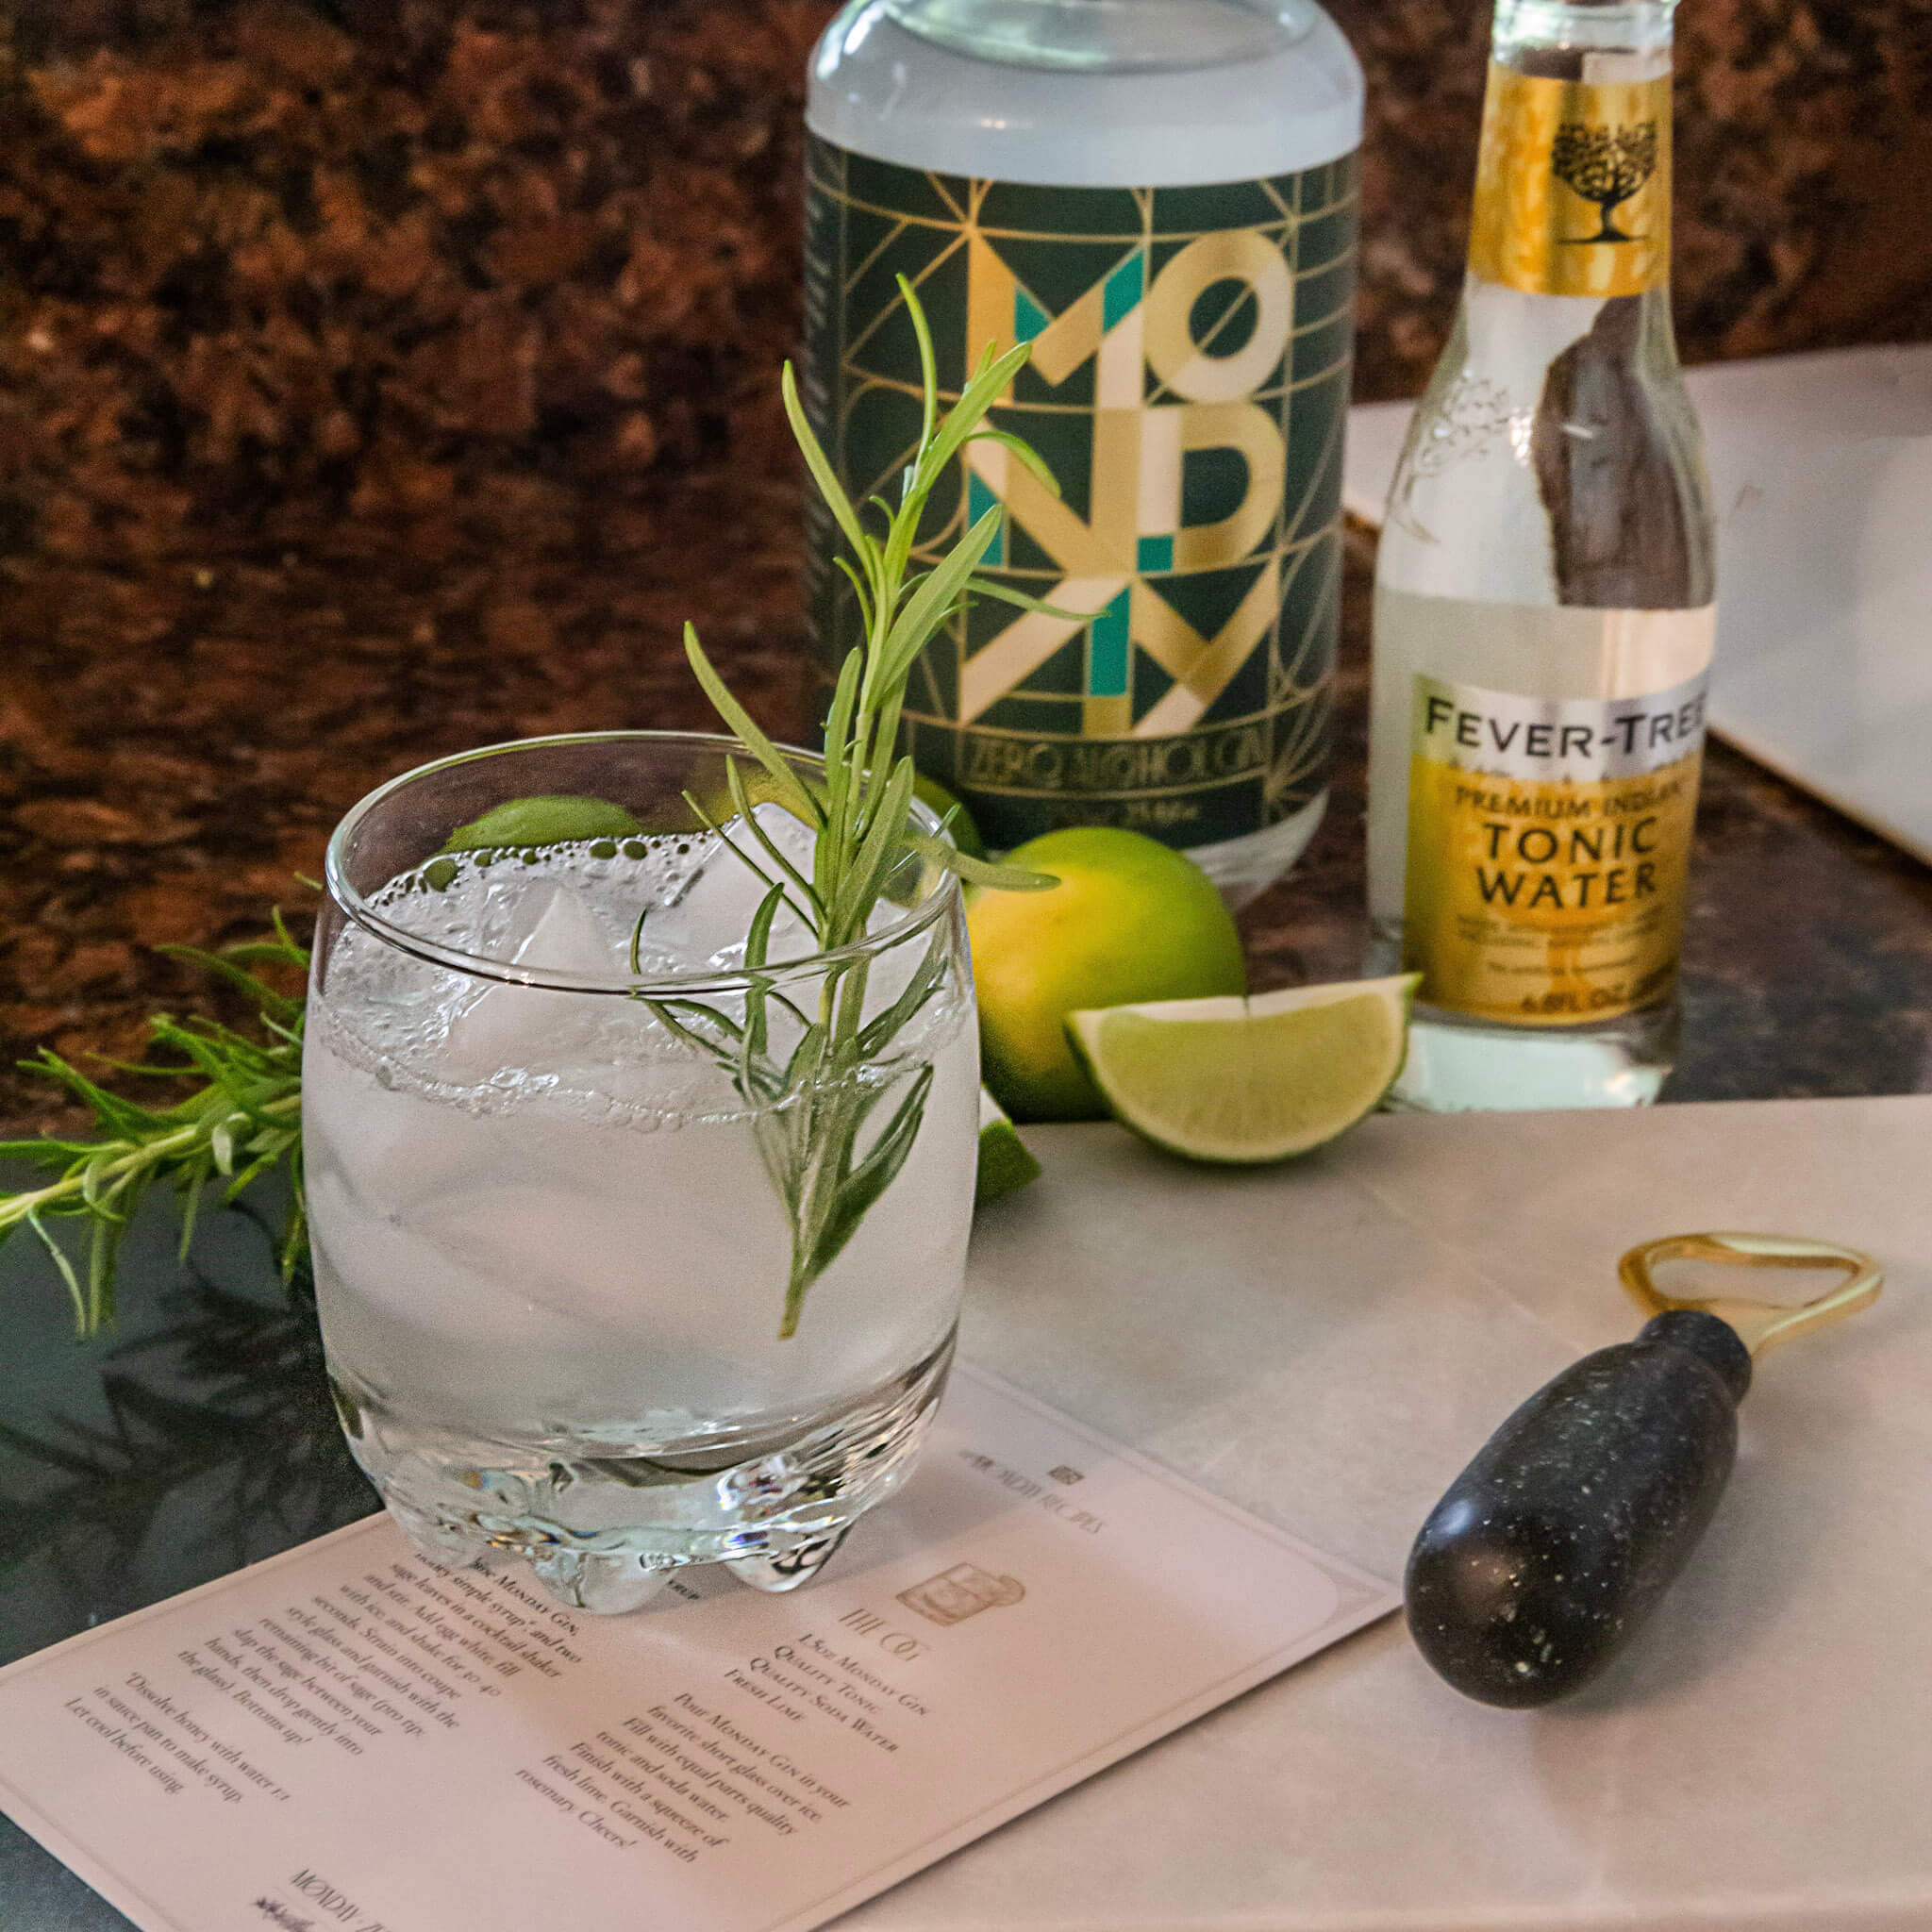 how a birthday sparked an idea for a zero-alcohol brand - photo of a non-alcoholic mezcal drink with tonic water